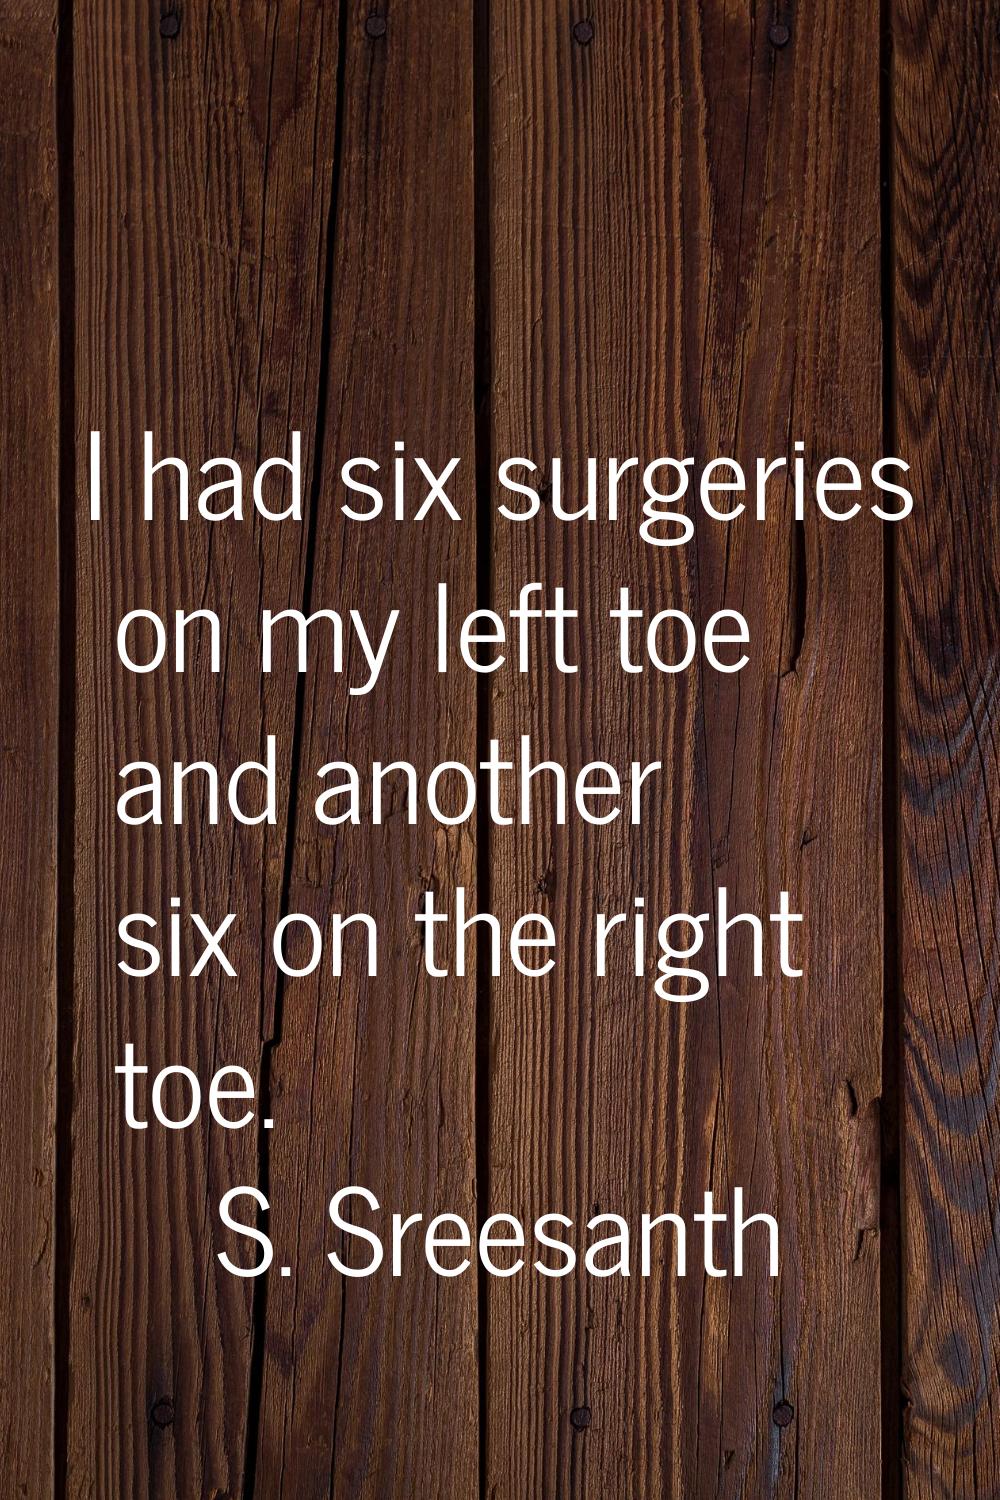 I had six surgeries on my left toe and another six on the right toe.